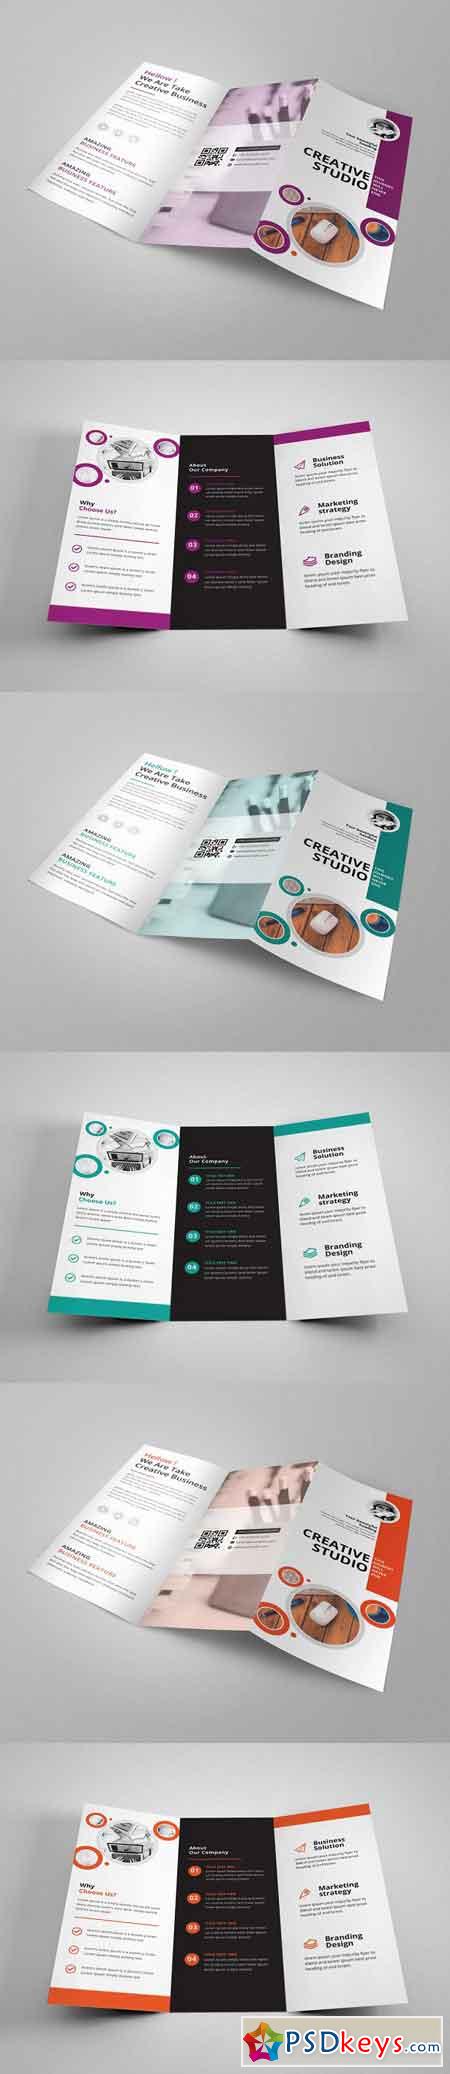 Trifold Brochure 4 3136703